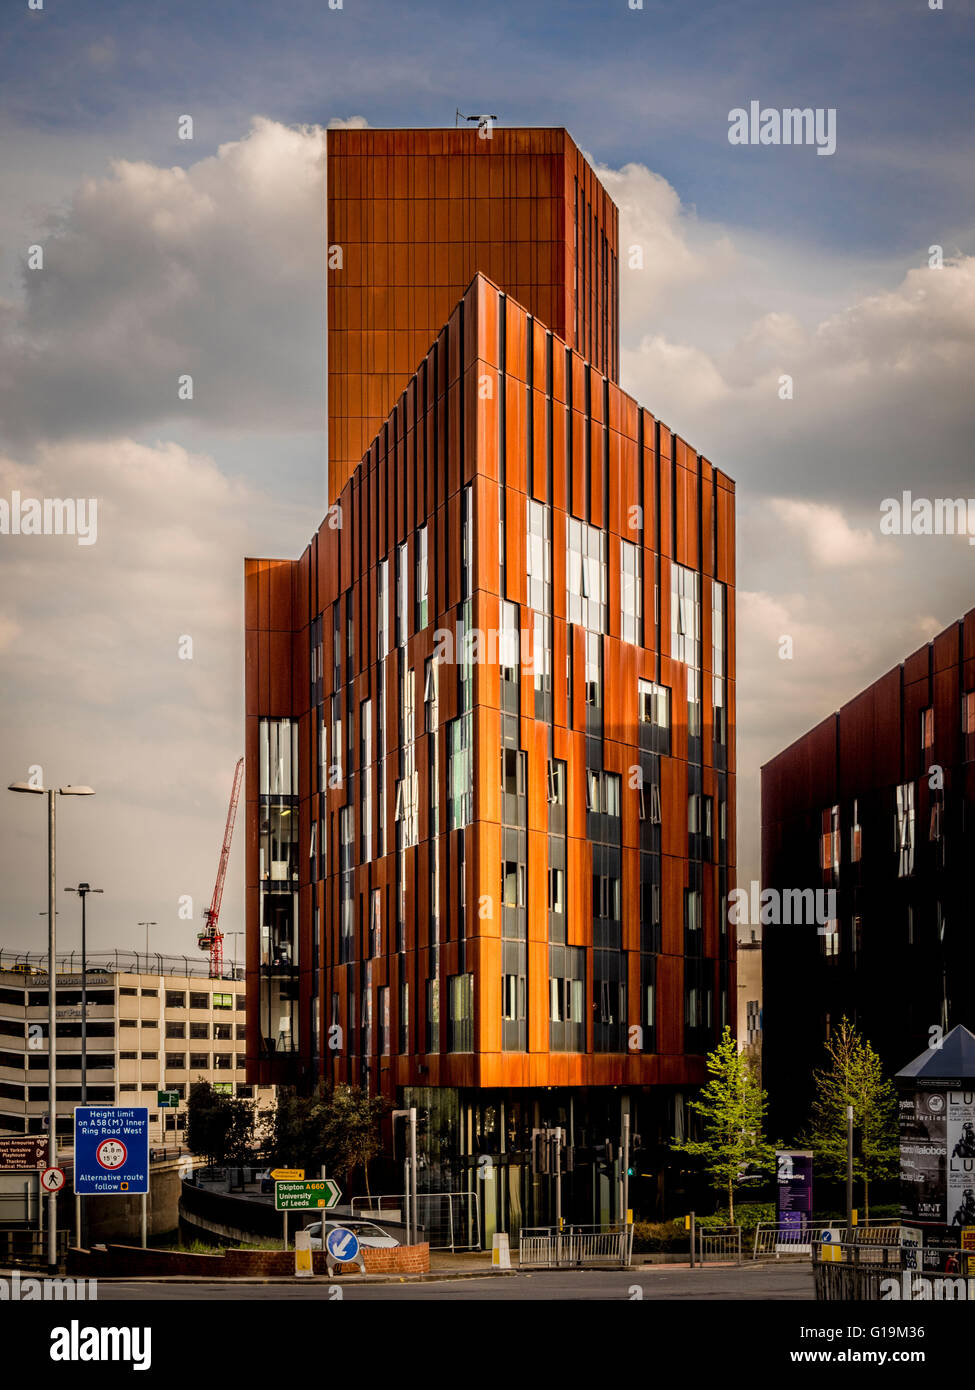 Broadcasting Tower, Leeds. Faculty of Arts, Environment and Technology, and student flats, Leeds Beckett University. Stock Photo